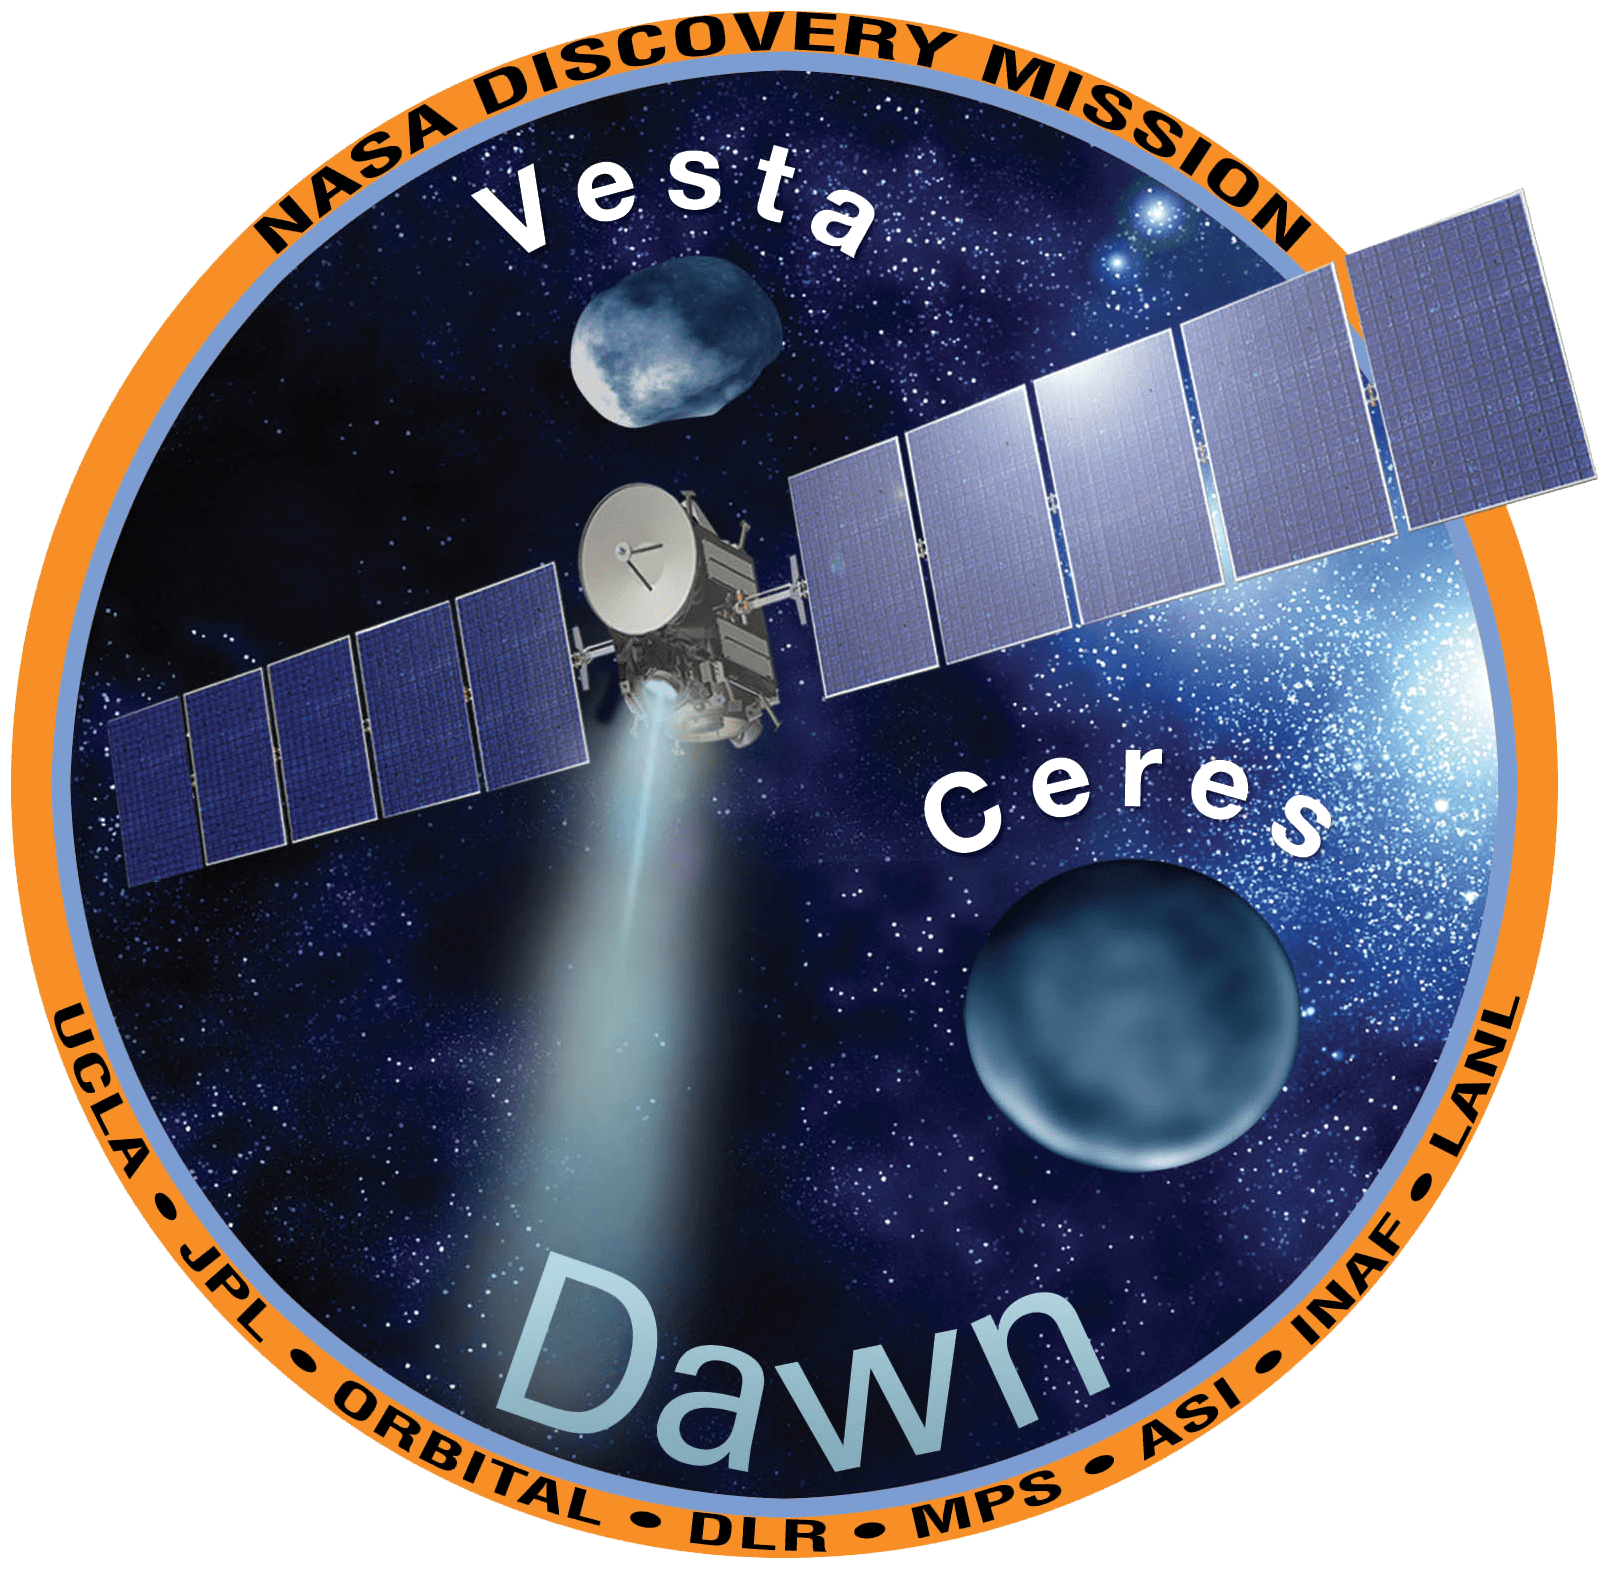 Dawn Mission patch shows the spacecraft and asteroid Vesta and dwarf planet Ceres.